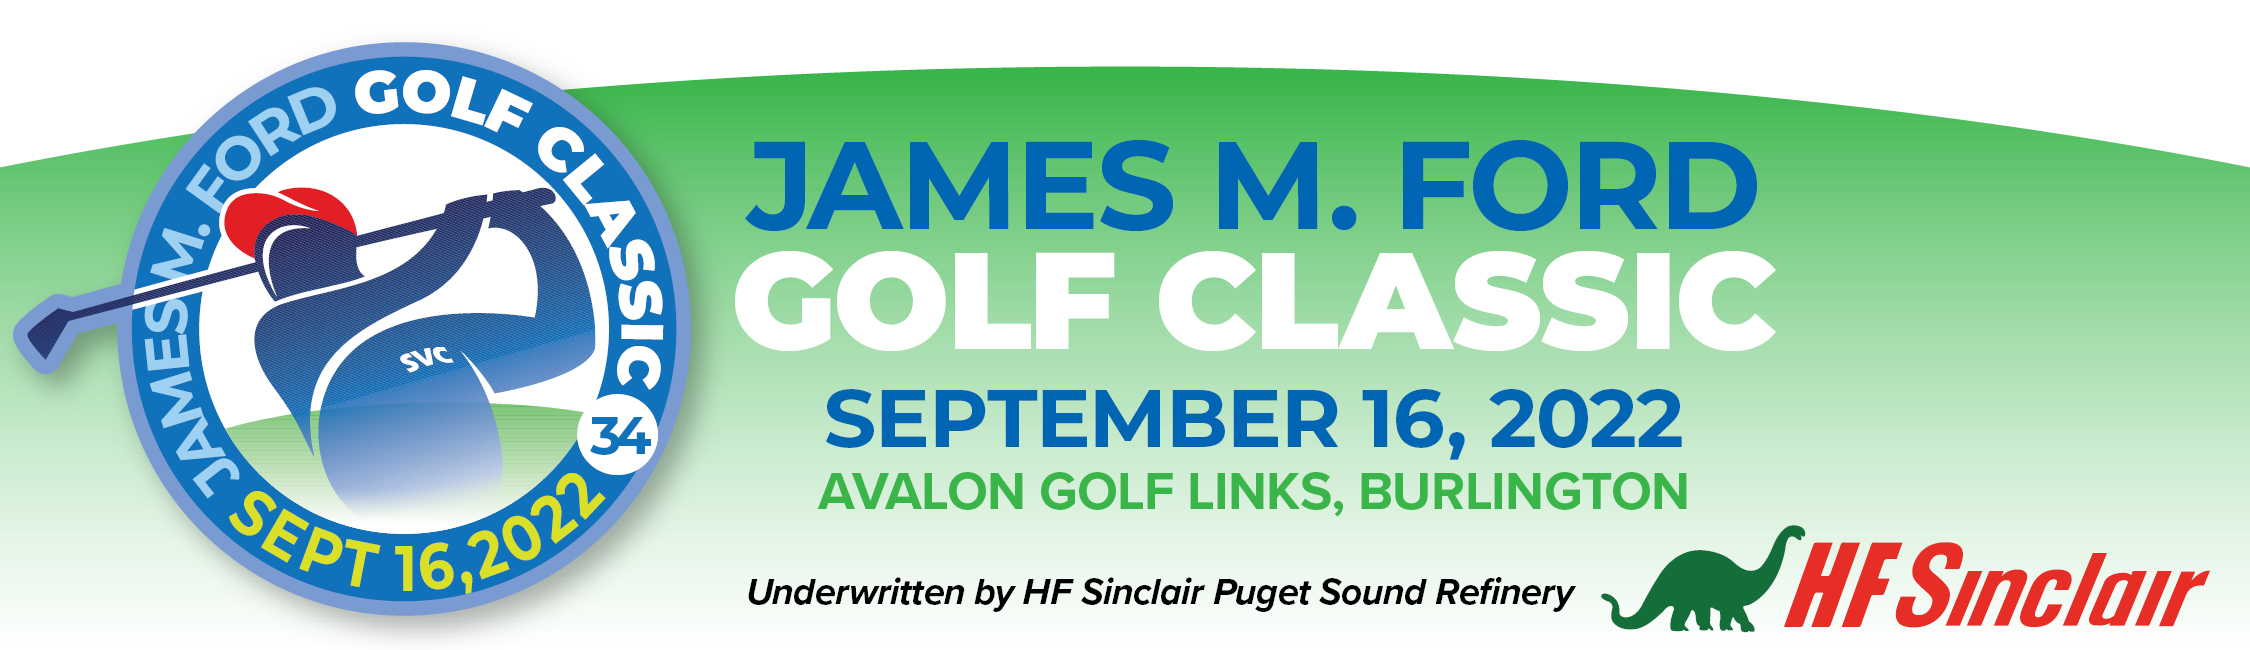 James M Ford Golf Classic graphic and sponsor logo